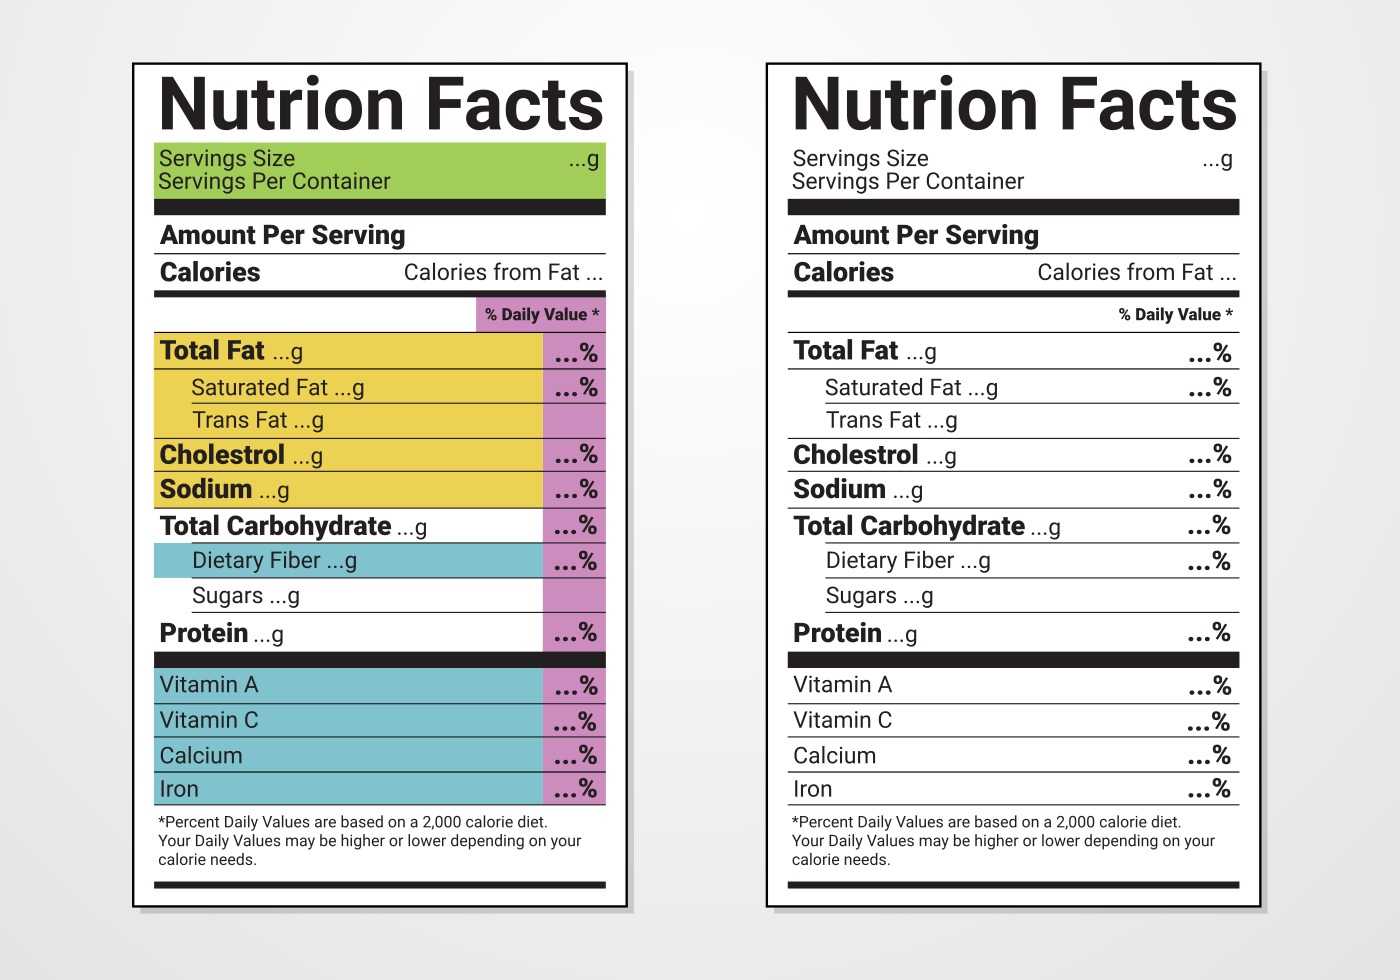 Nutrition Facts Label Vector Templates – Download Free Throughout Blank Food Label Template